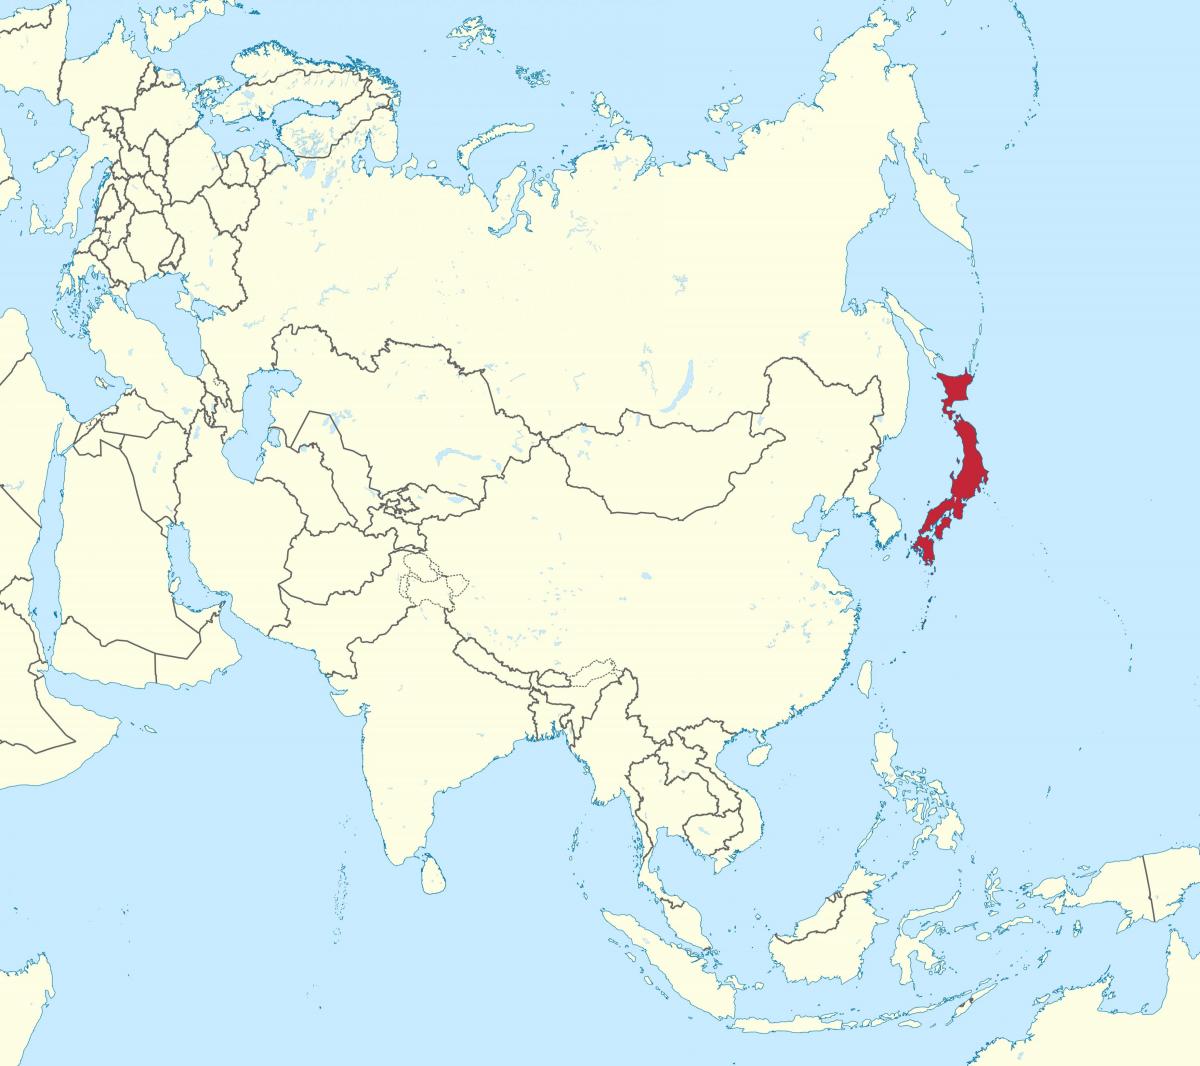 Japan location on the Asia map